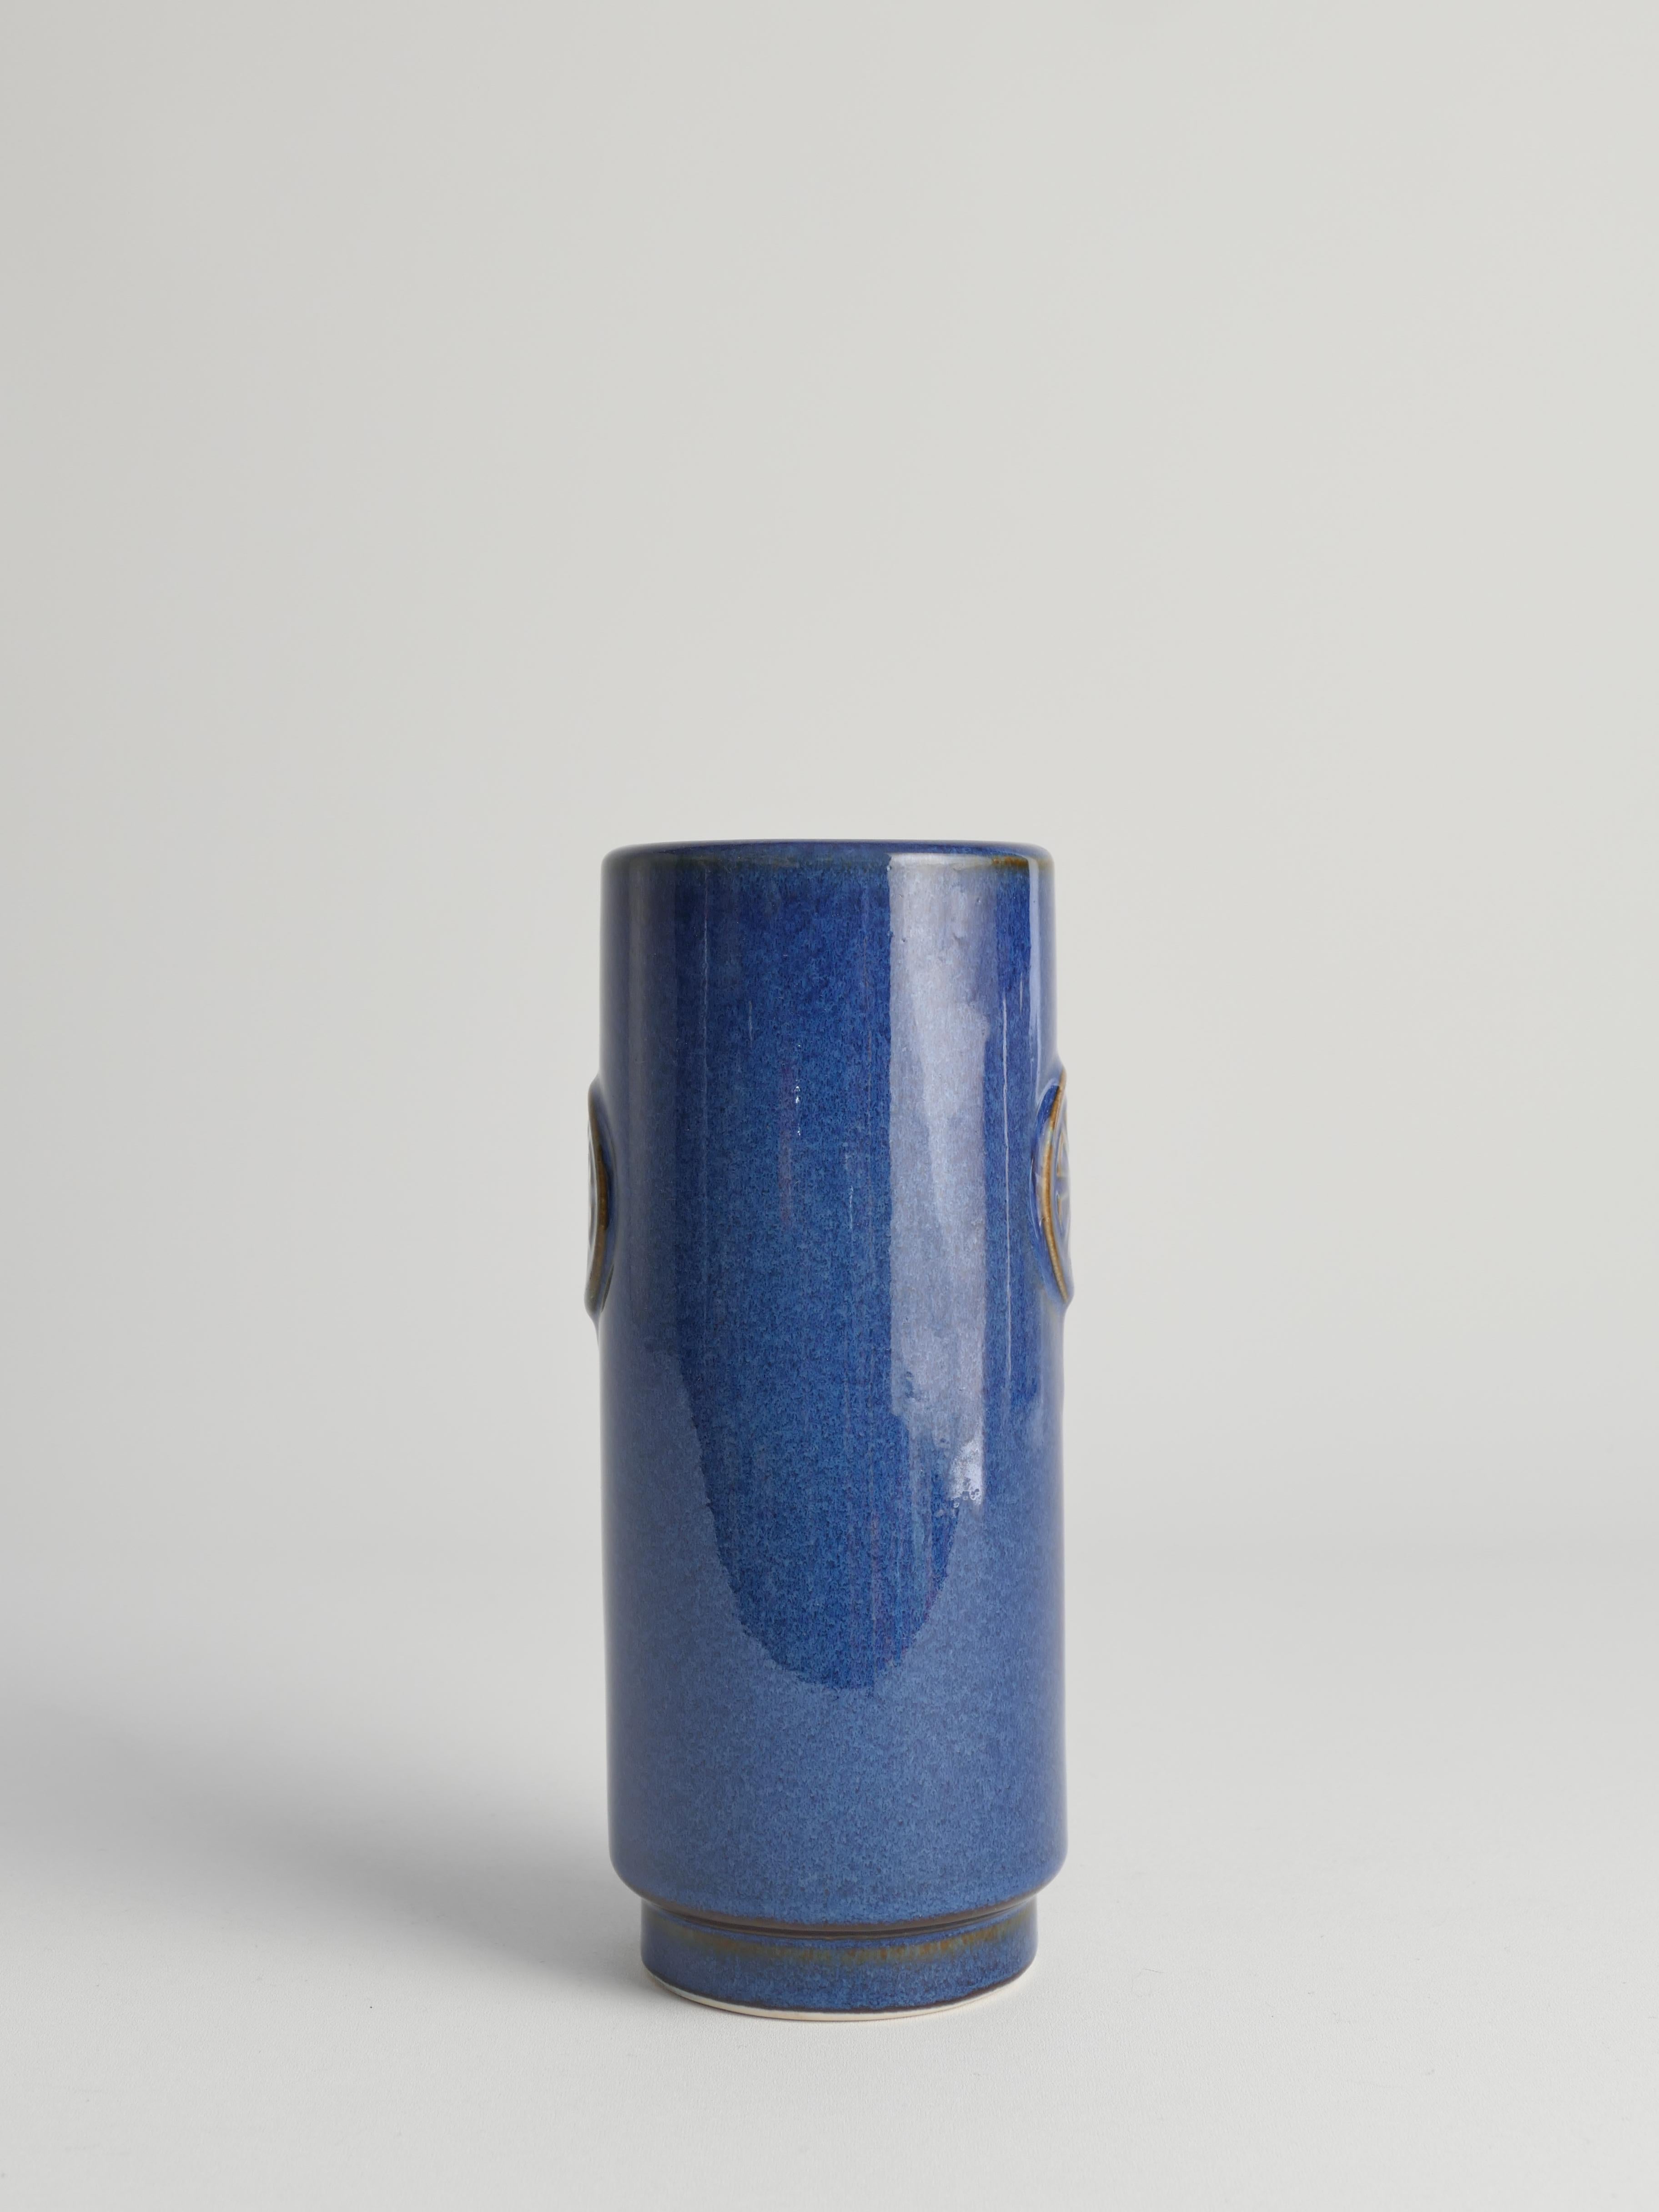 Danish Blue Stoneware Vase from Nordlys Series by Maria Philippi for Søholm, 1960s For Sale